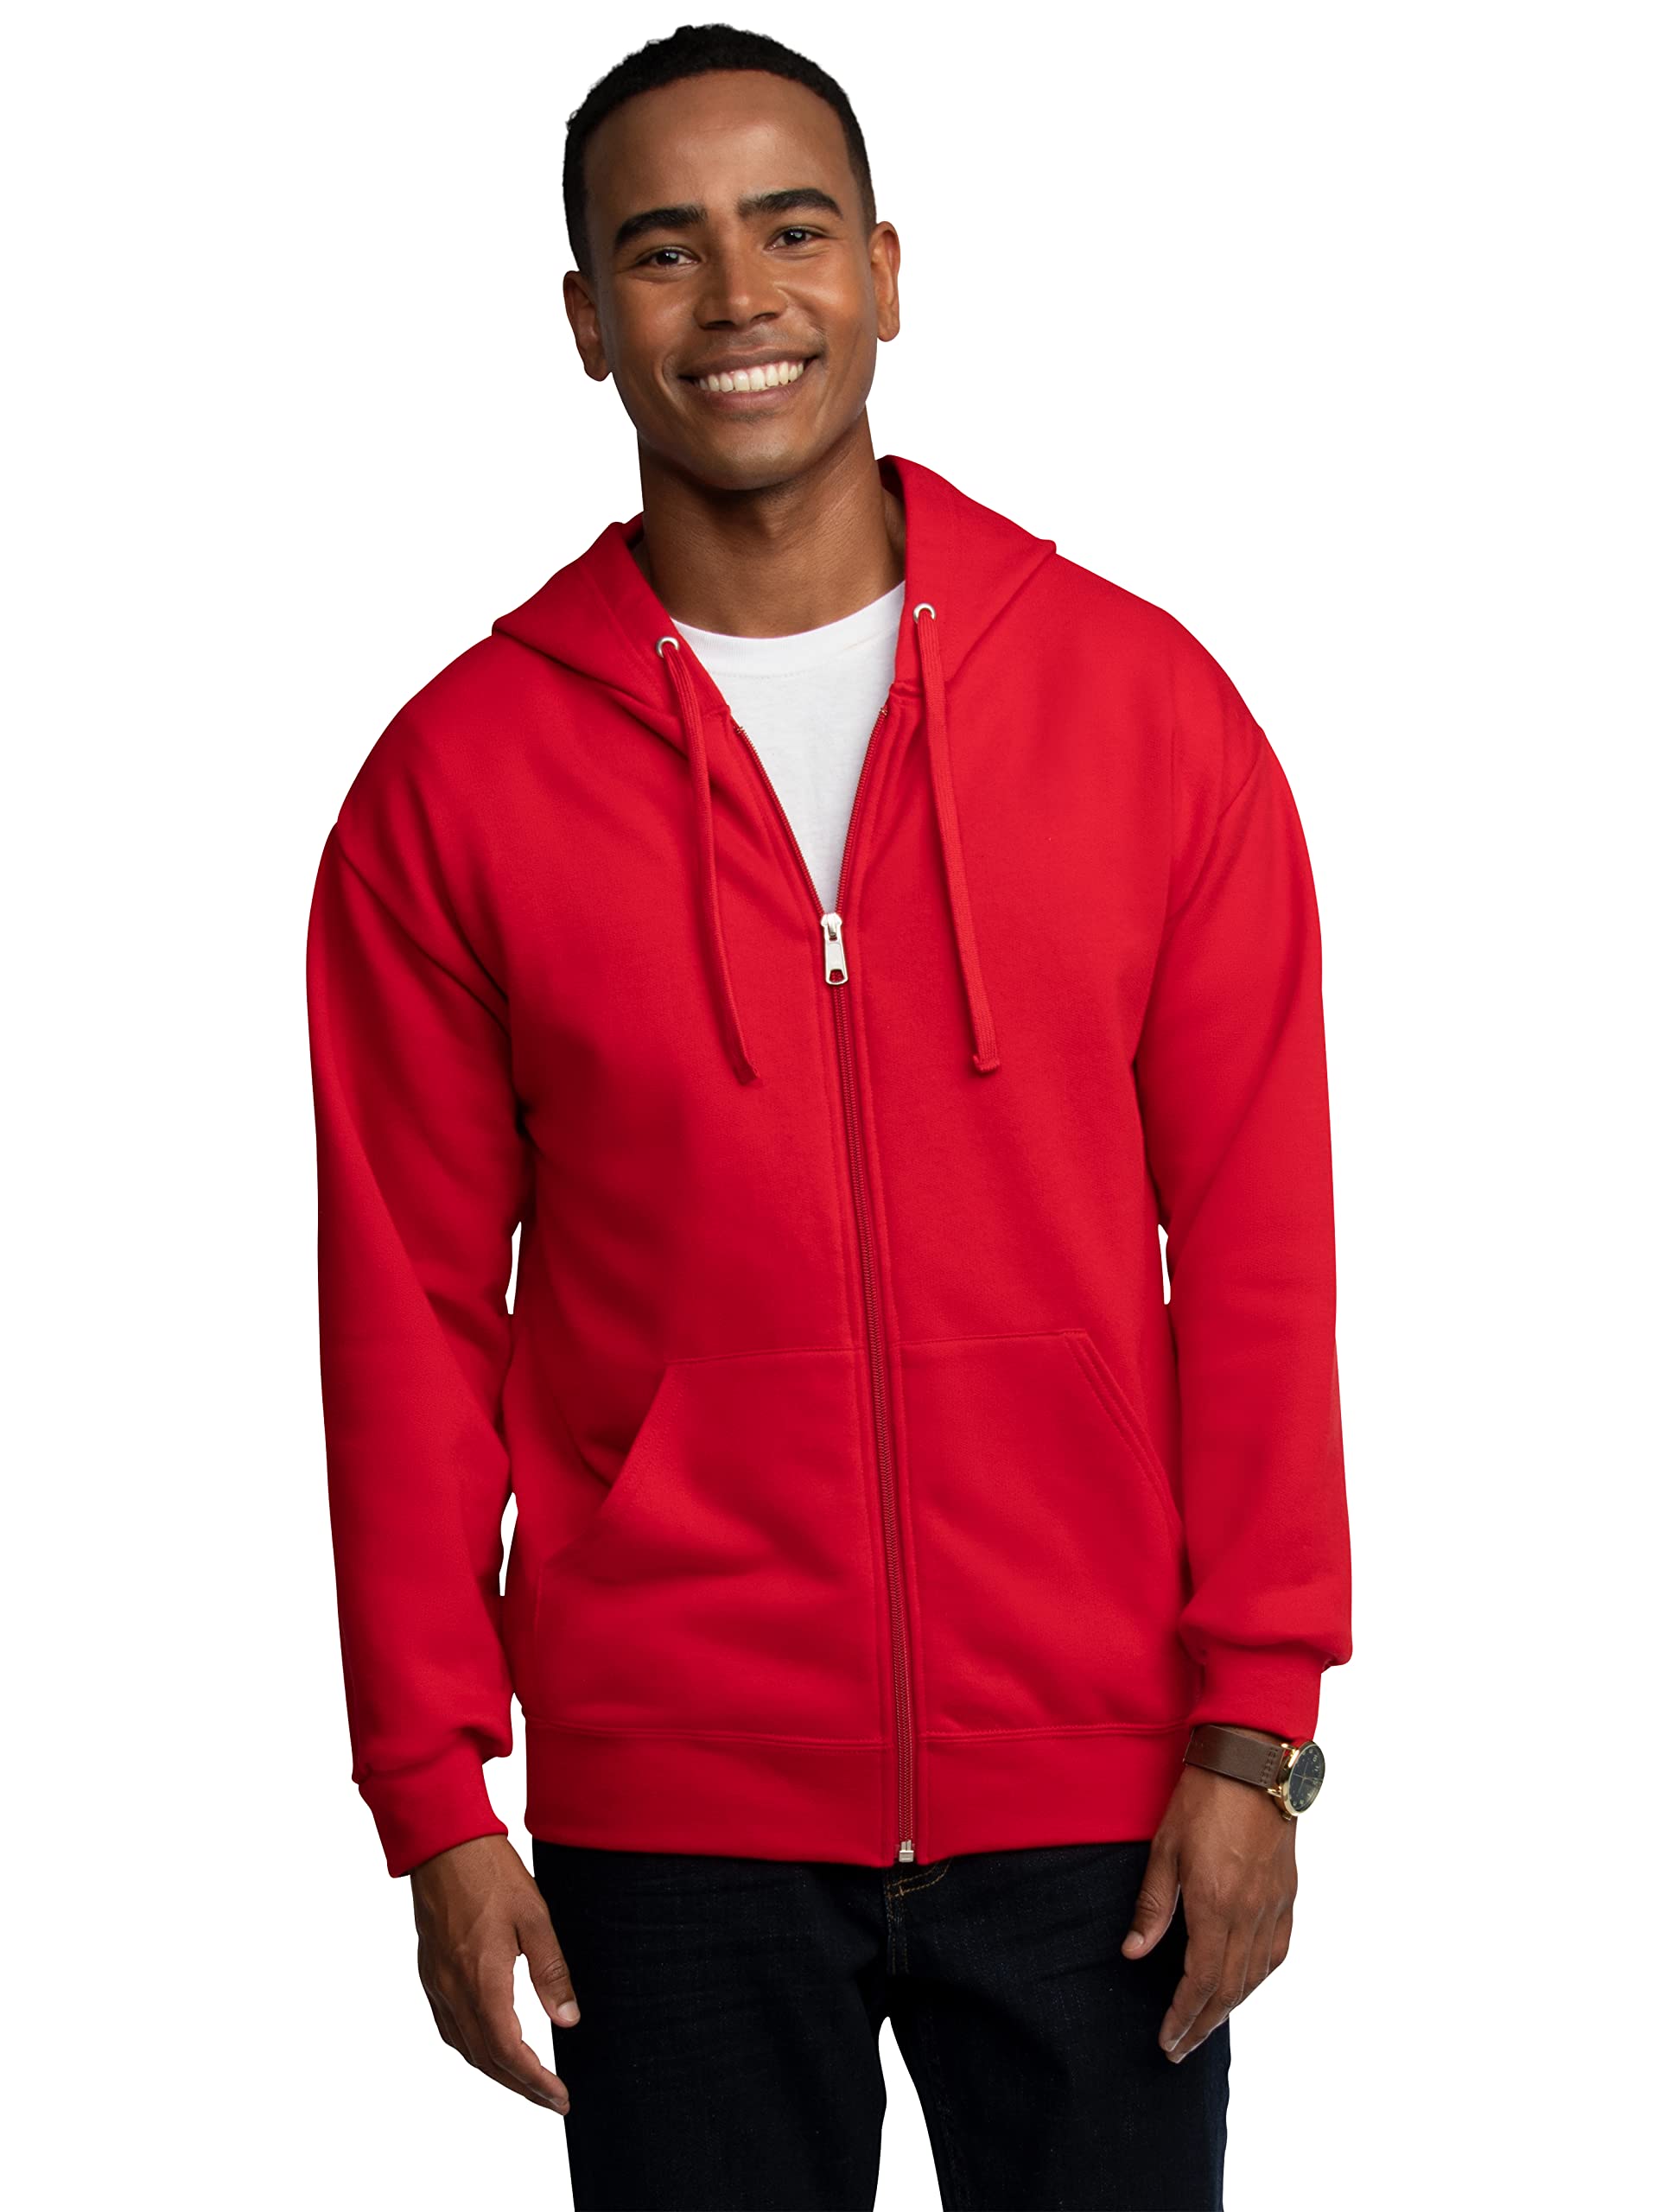 Fruit of the Loom Eversoft Fleece Hoodies, Pullover & Full Zip, Moisture Wicking & Breathable, Sizes S-4X